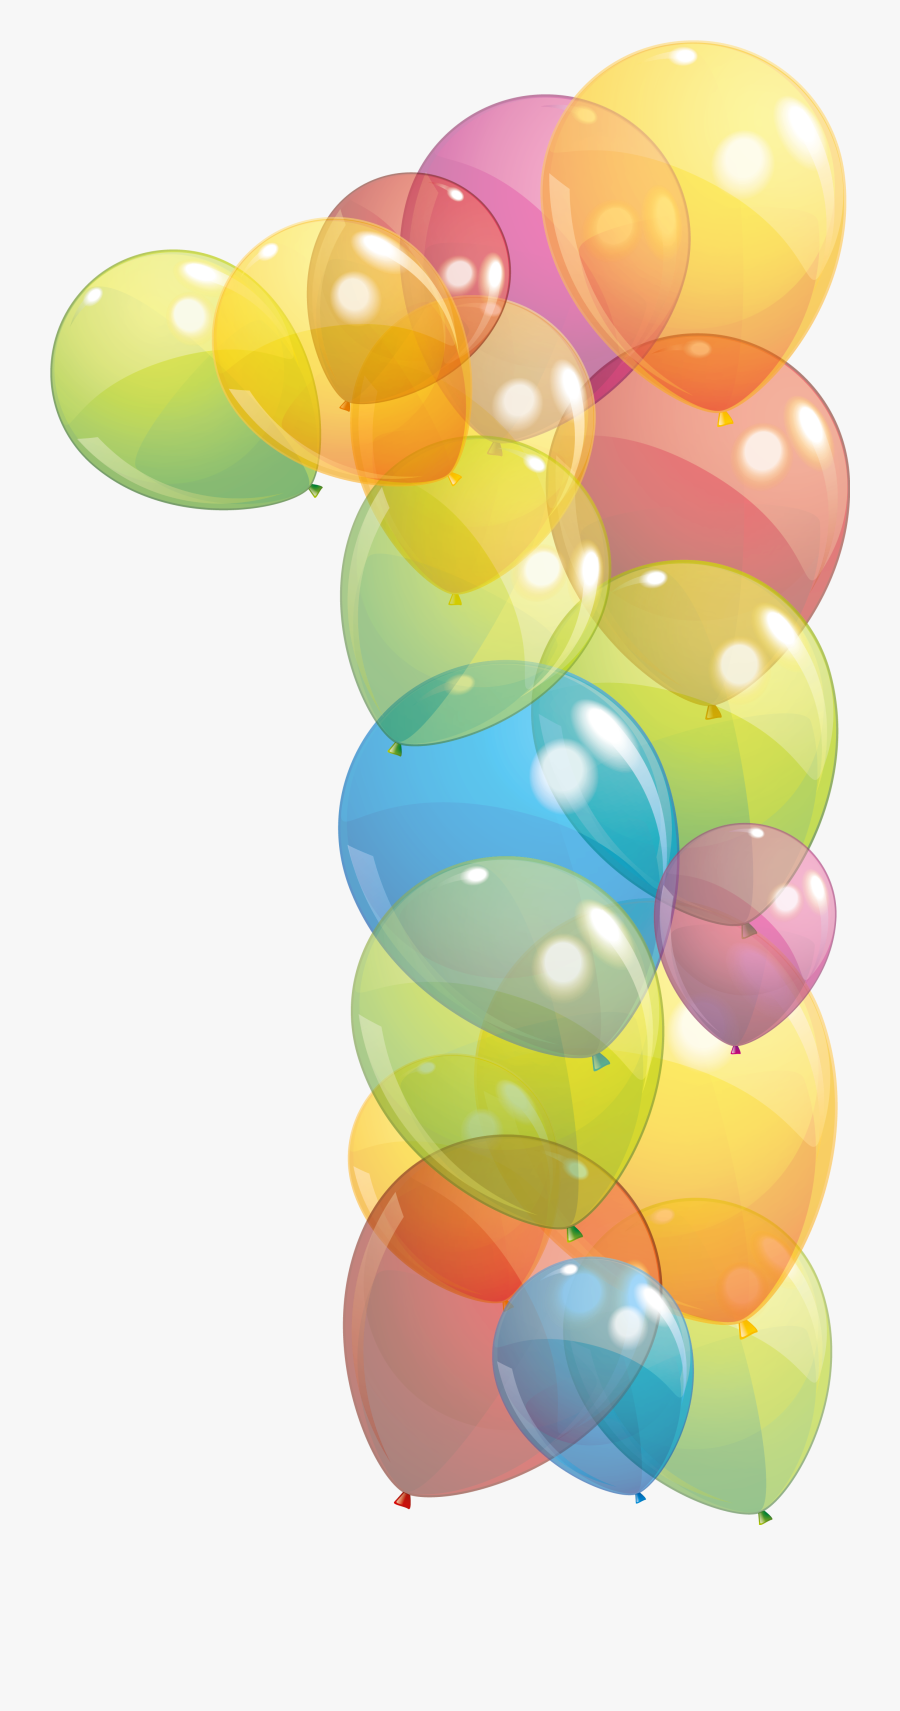 Transparent One Number Of Balloons Png Clipart Image - Number 1 Balloon Clipart, Transparent Clipart